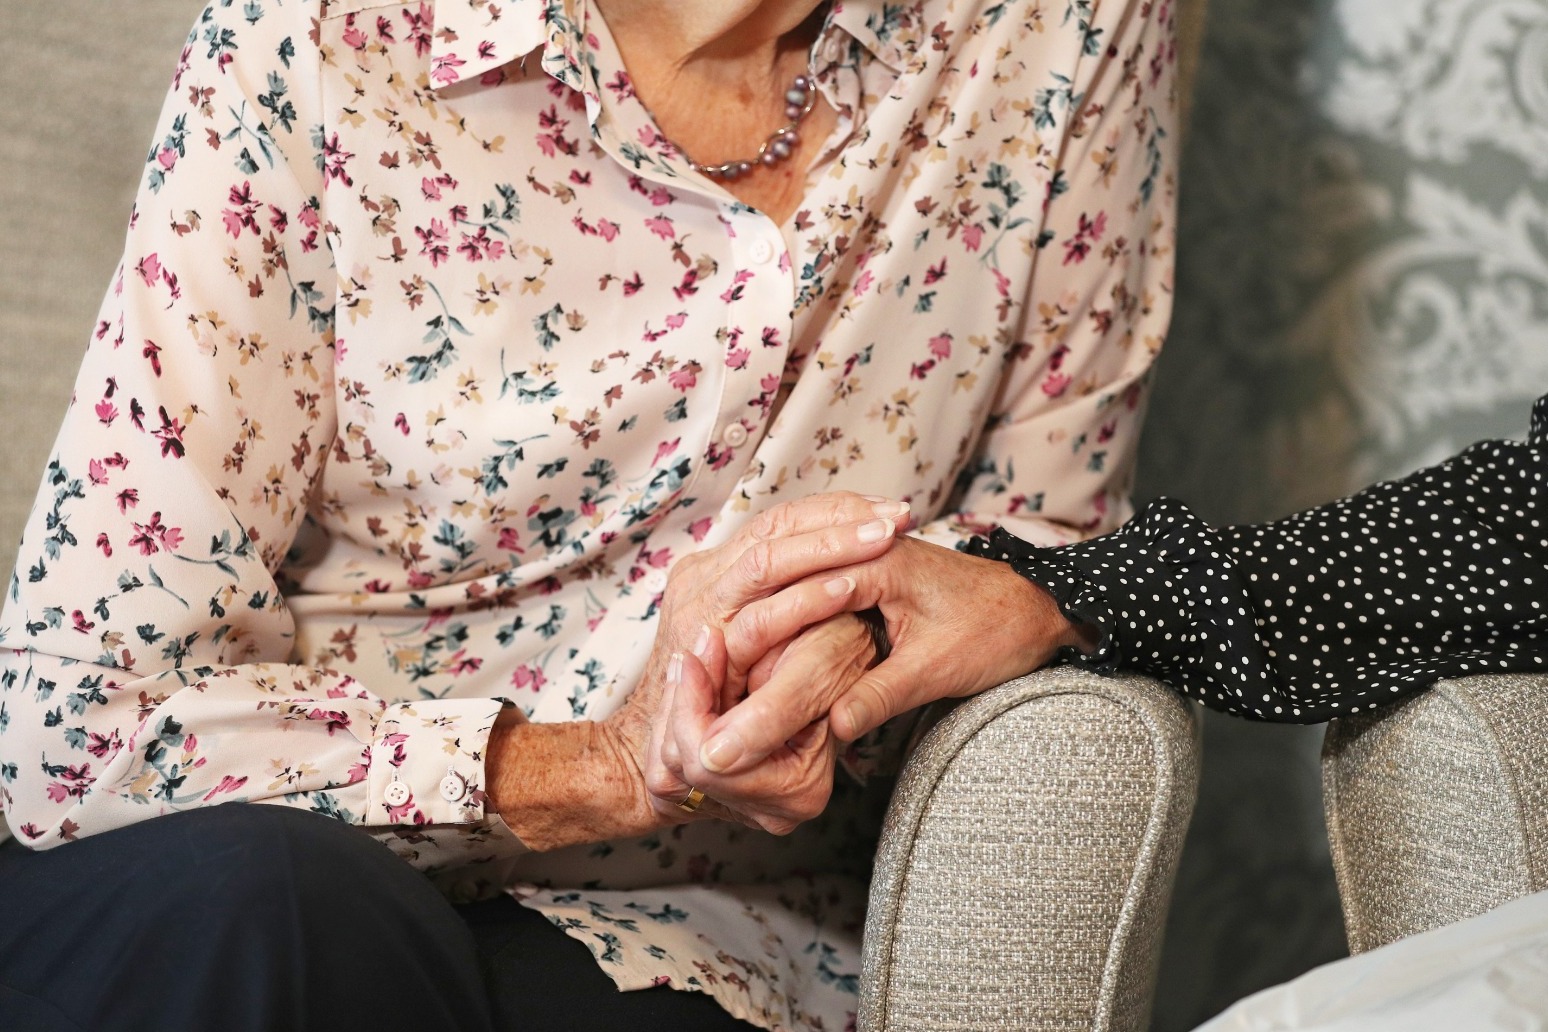 MPs back controversial social care reforms in England 